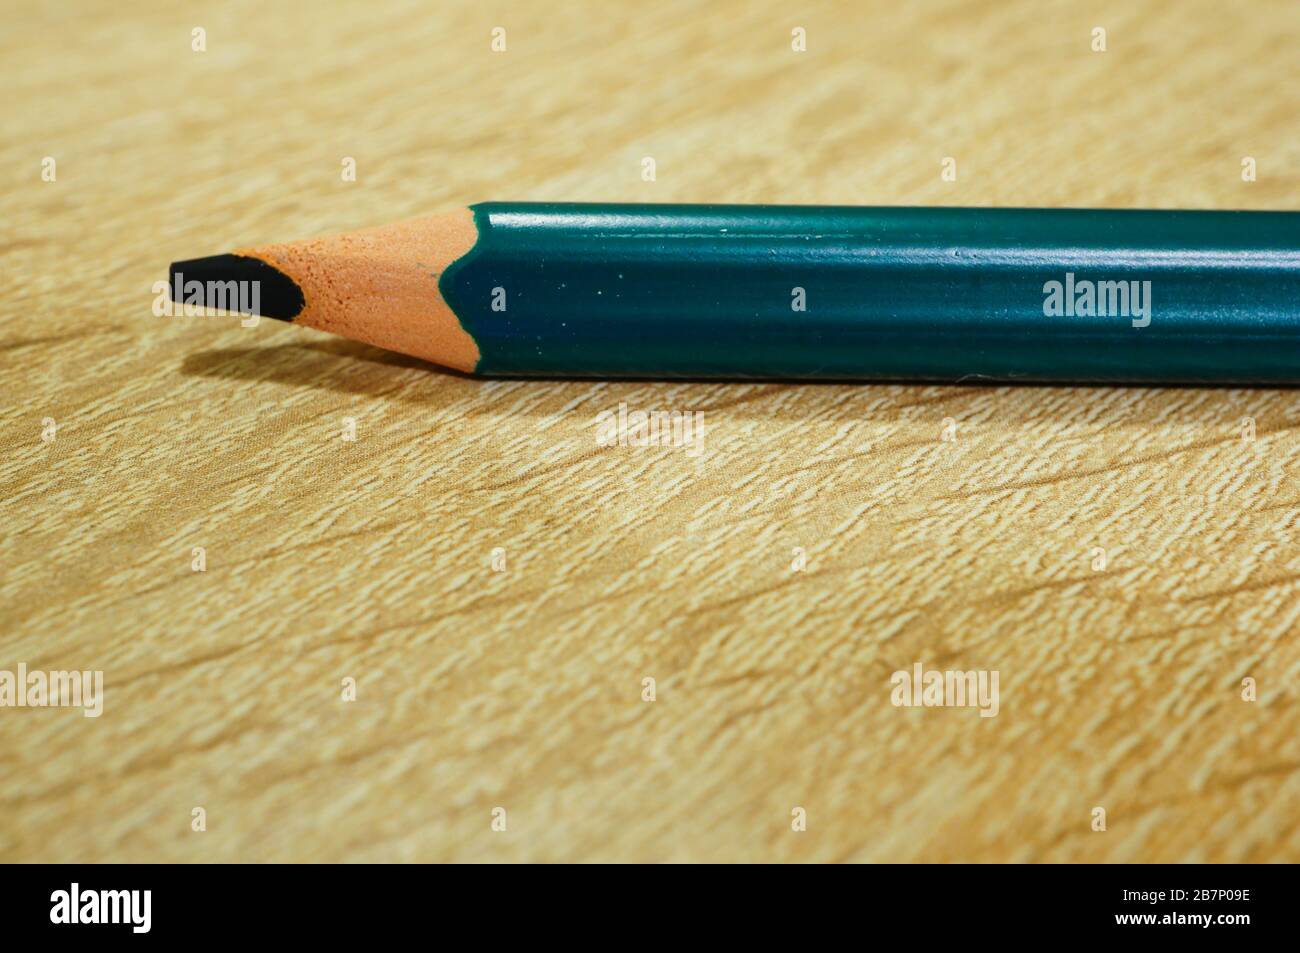 Closeup shot of a colored pencil on a wooden surface Stock Photo